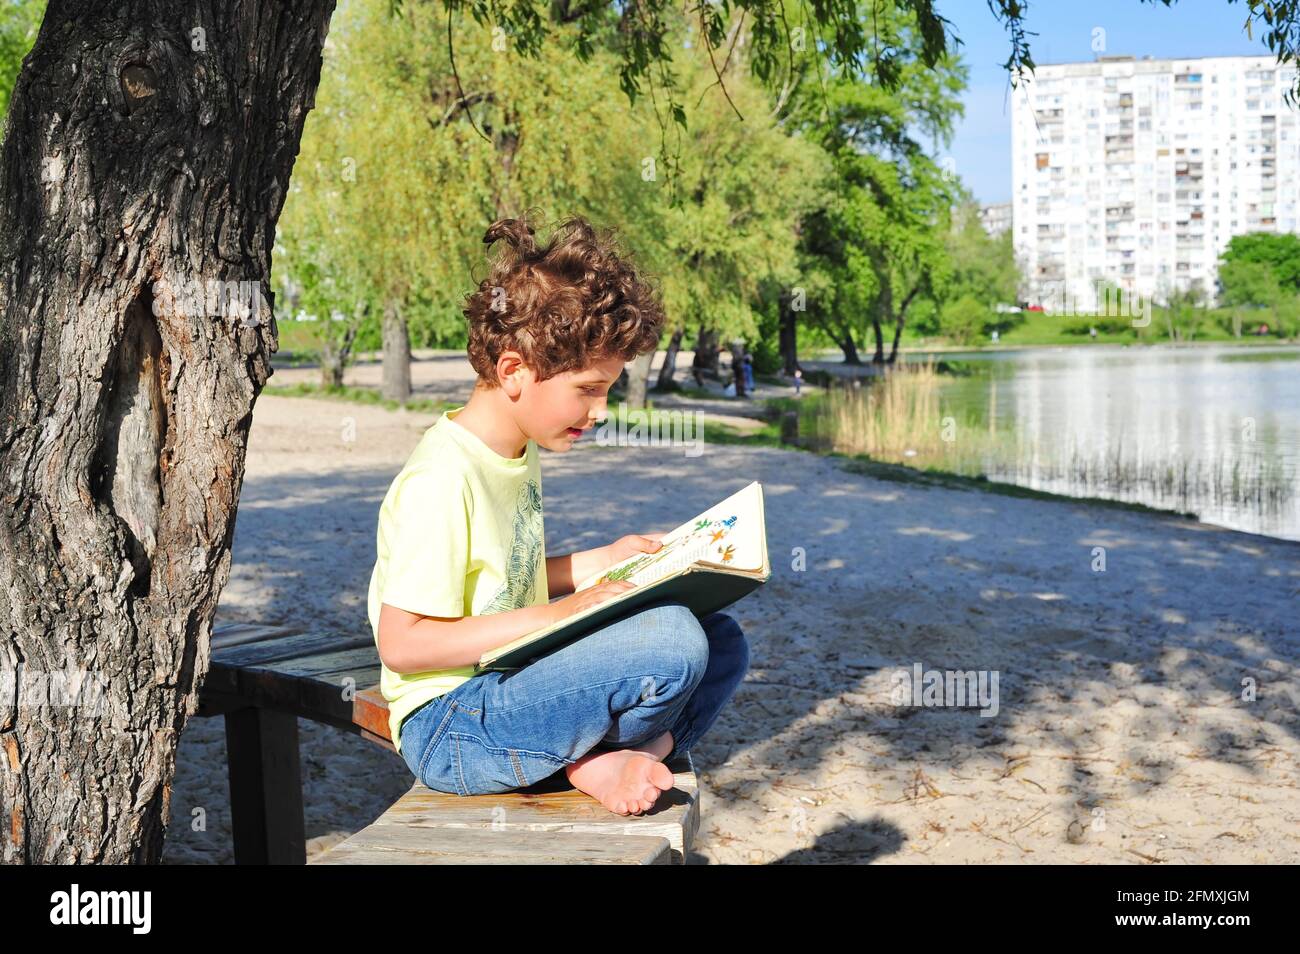 A cute little boy sits on the shore of the lake and reads an old book. Stock Photo